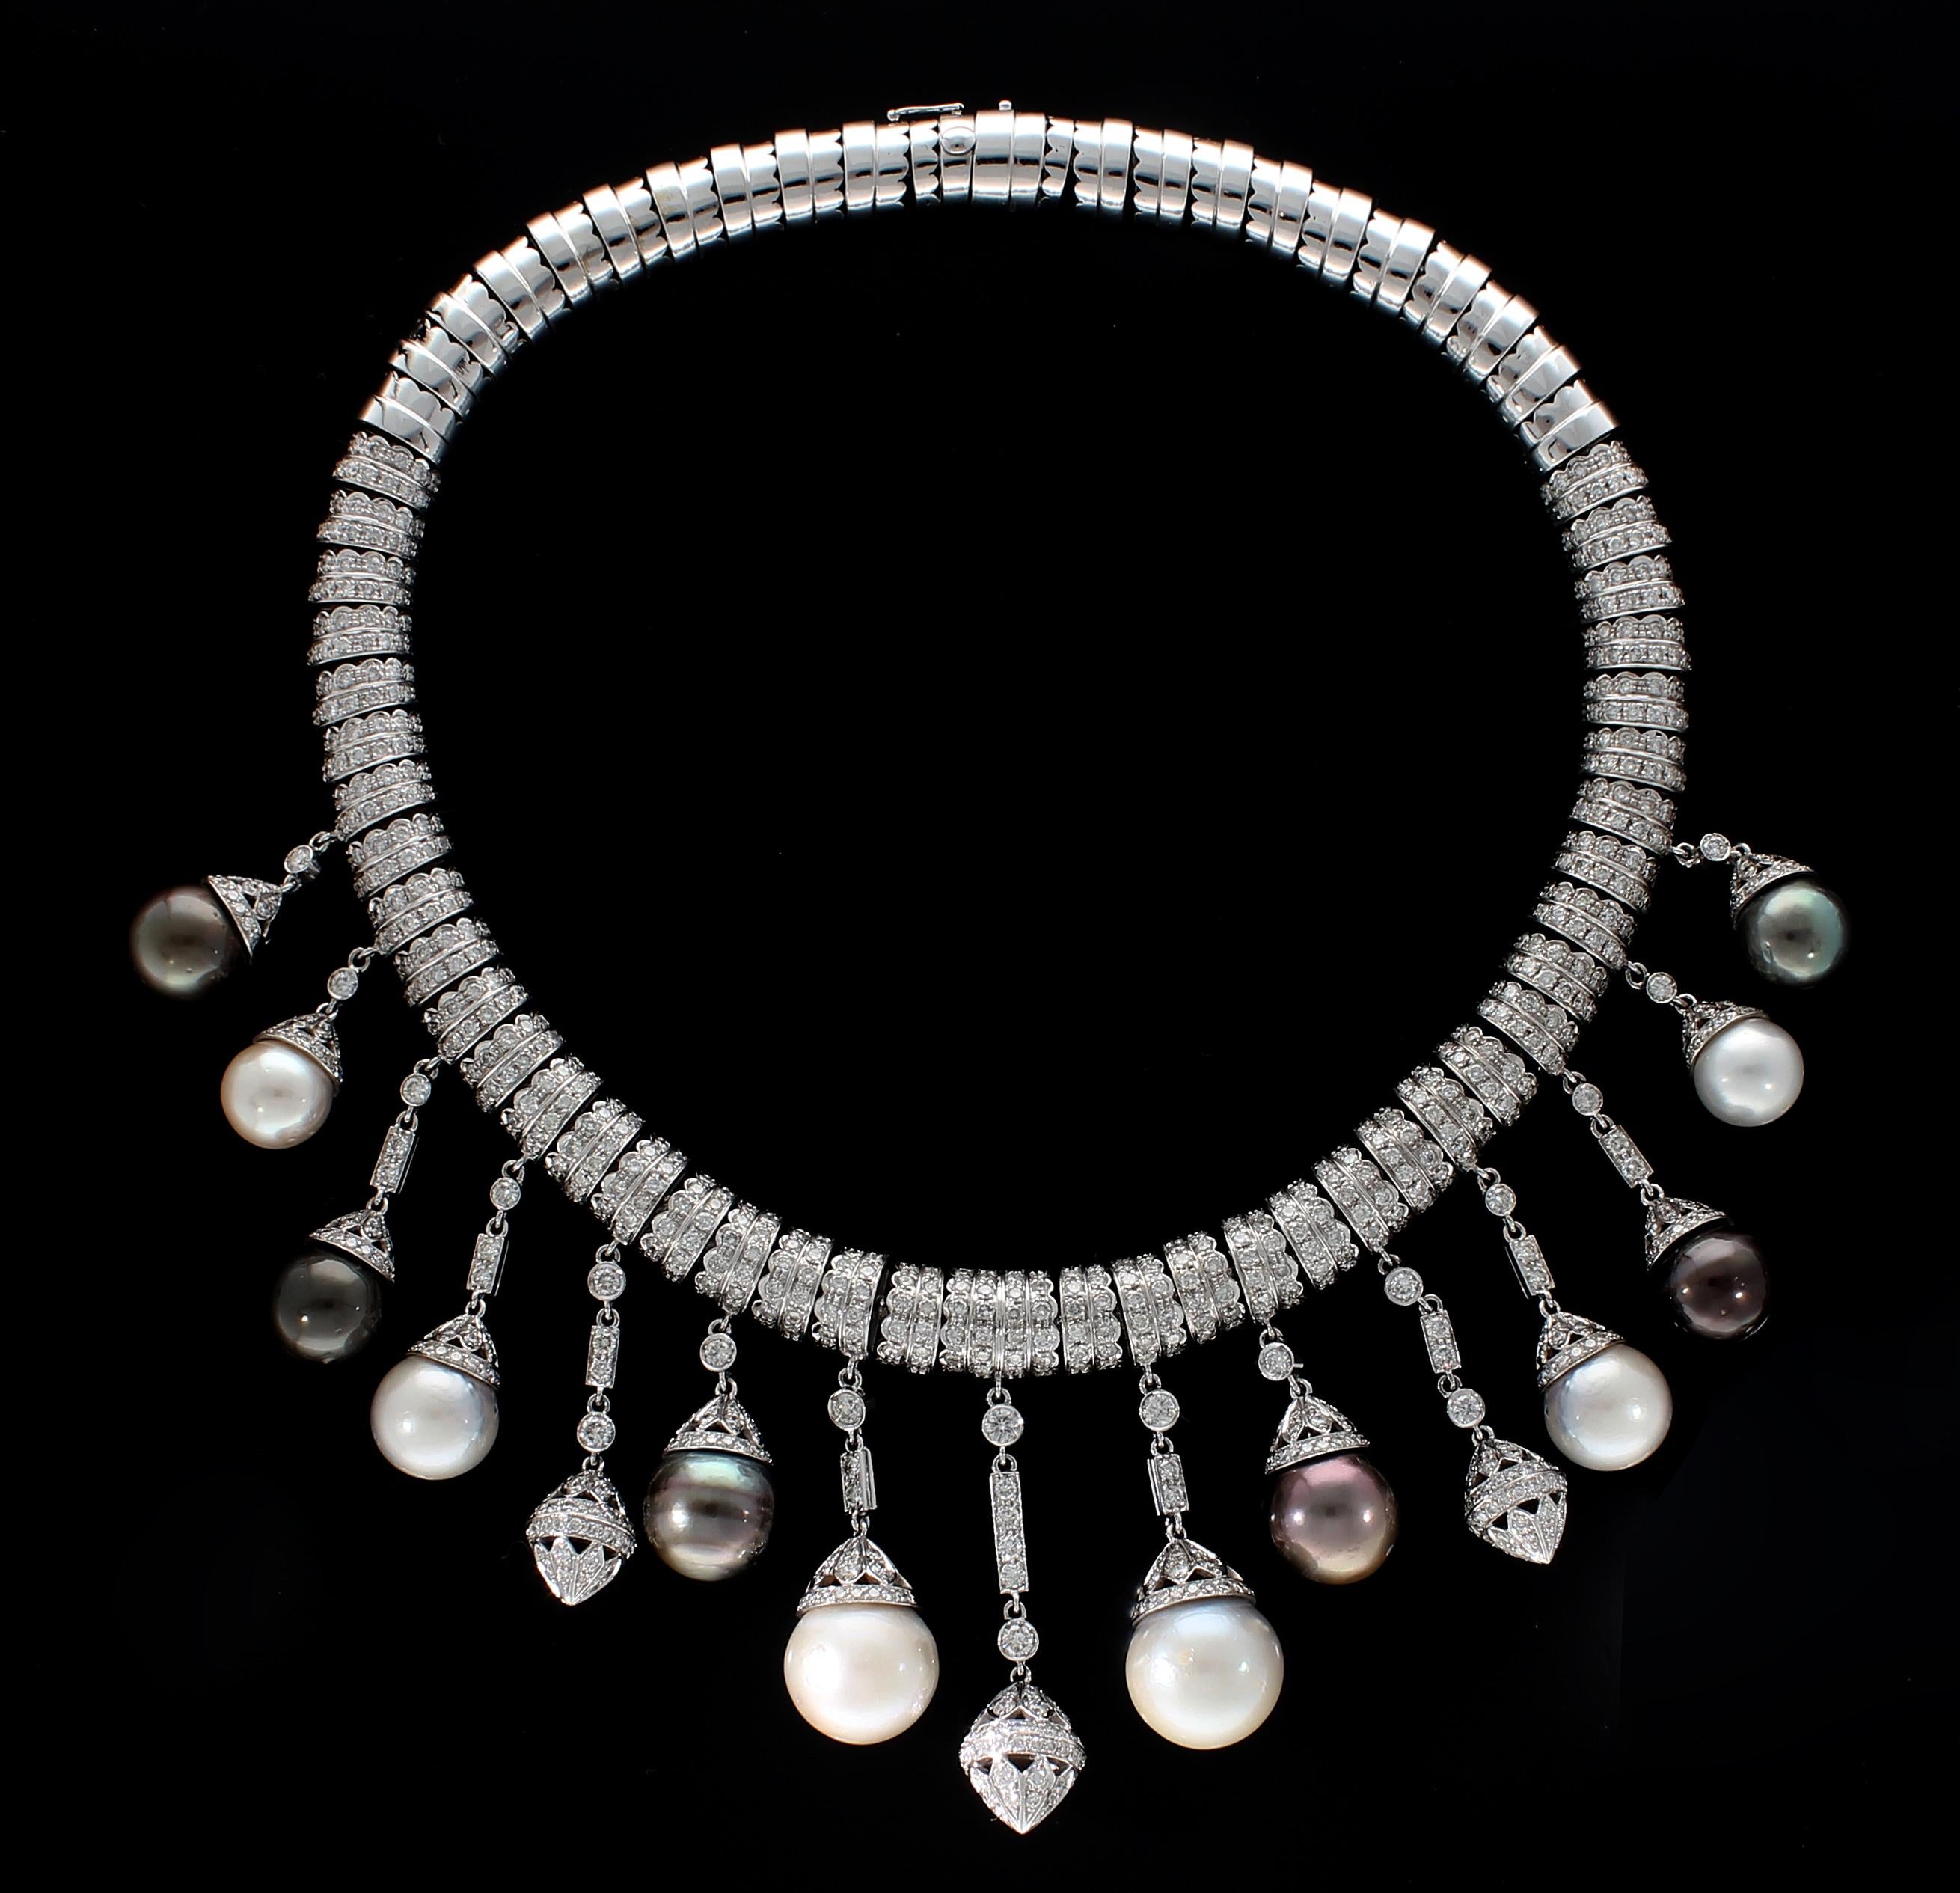 Modern Necklace White Gold and Diamonds, Pendants with White and Black Pearls S.S. For Sale